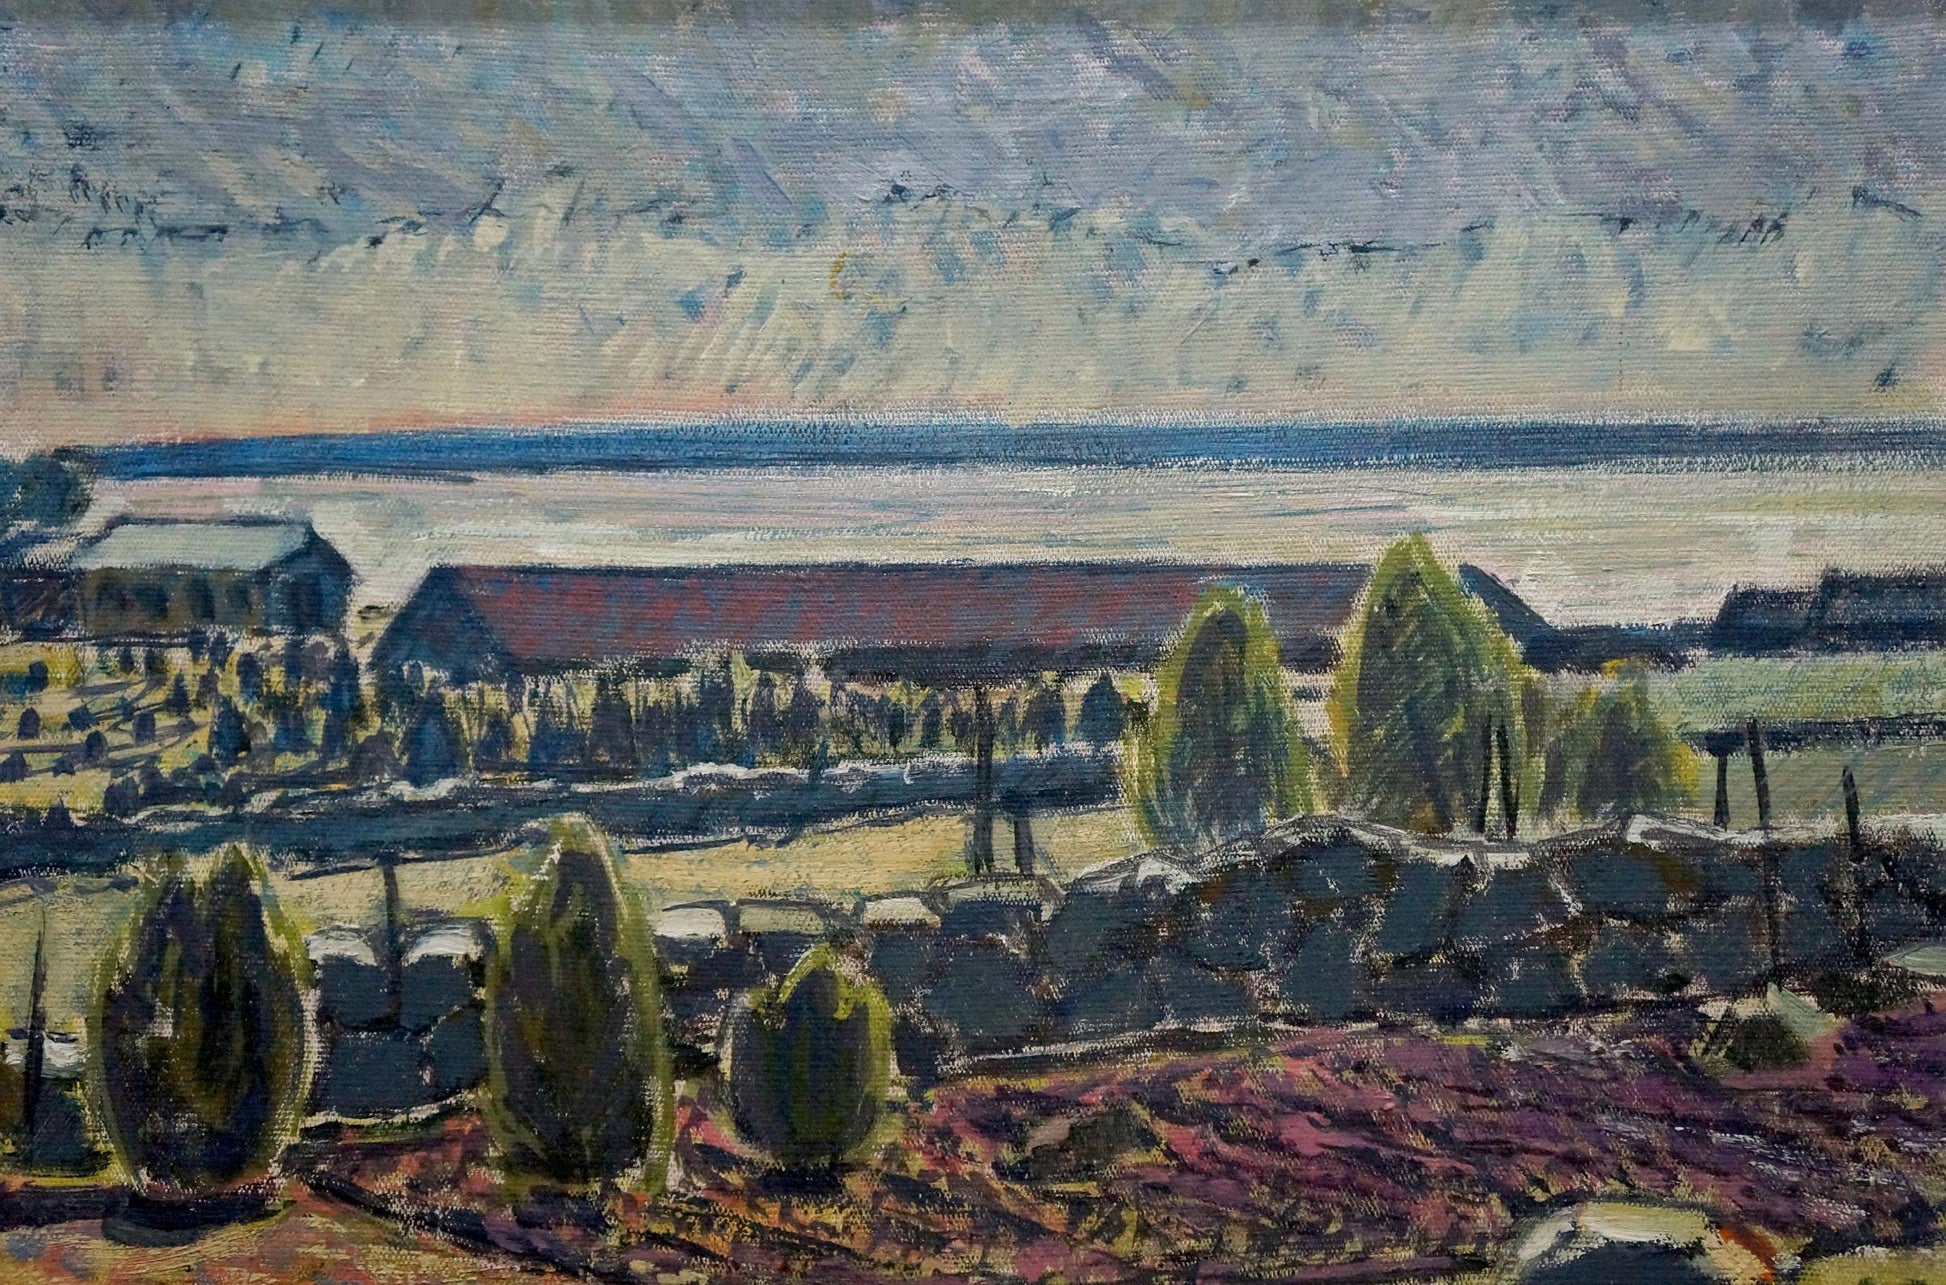 House near the sea depicted in an oil painting by a Lithuanian artist